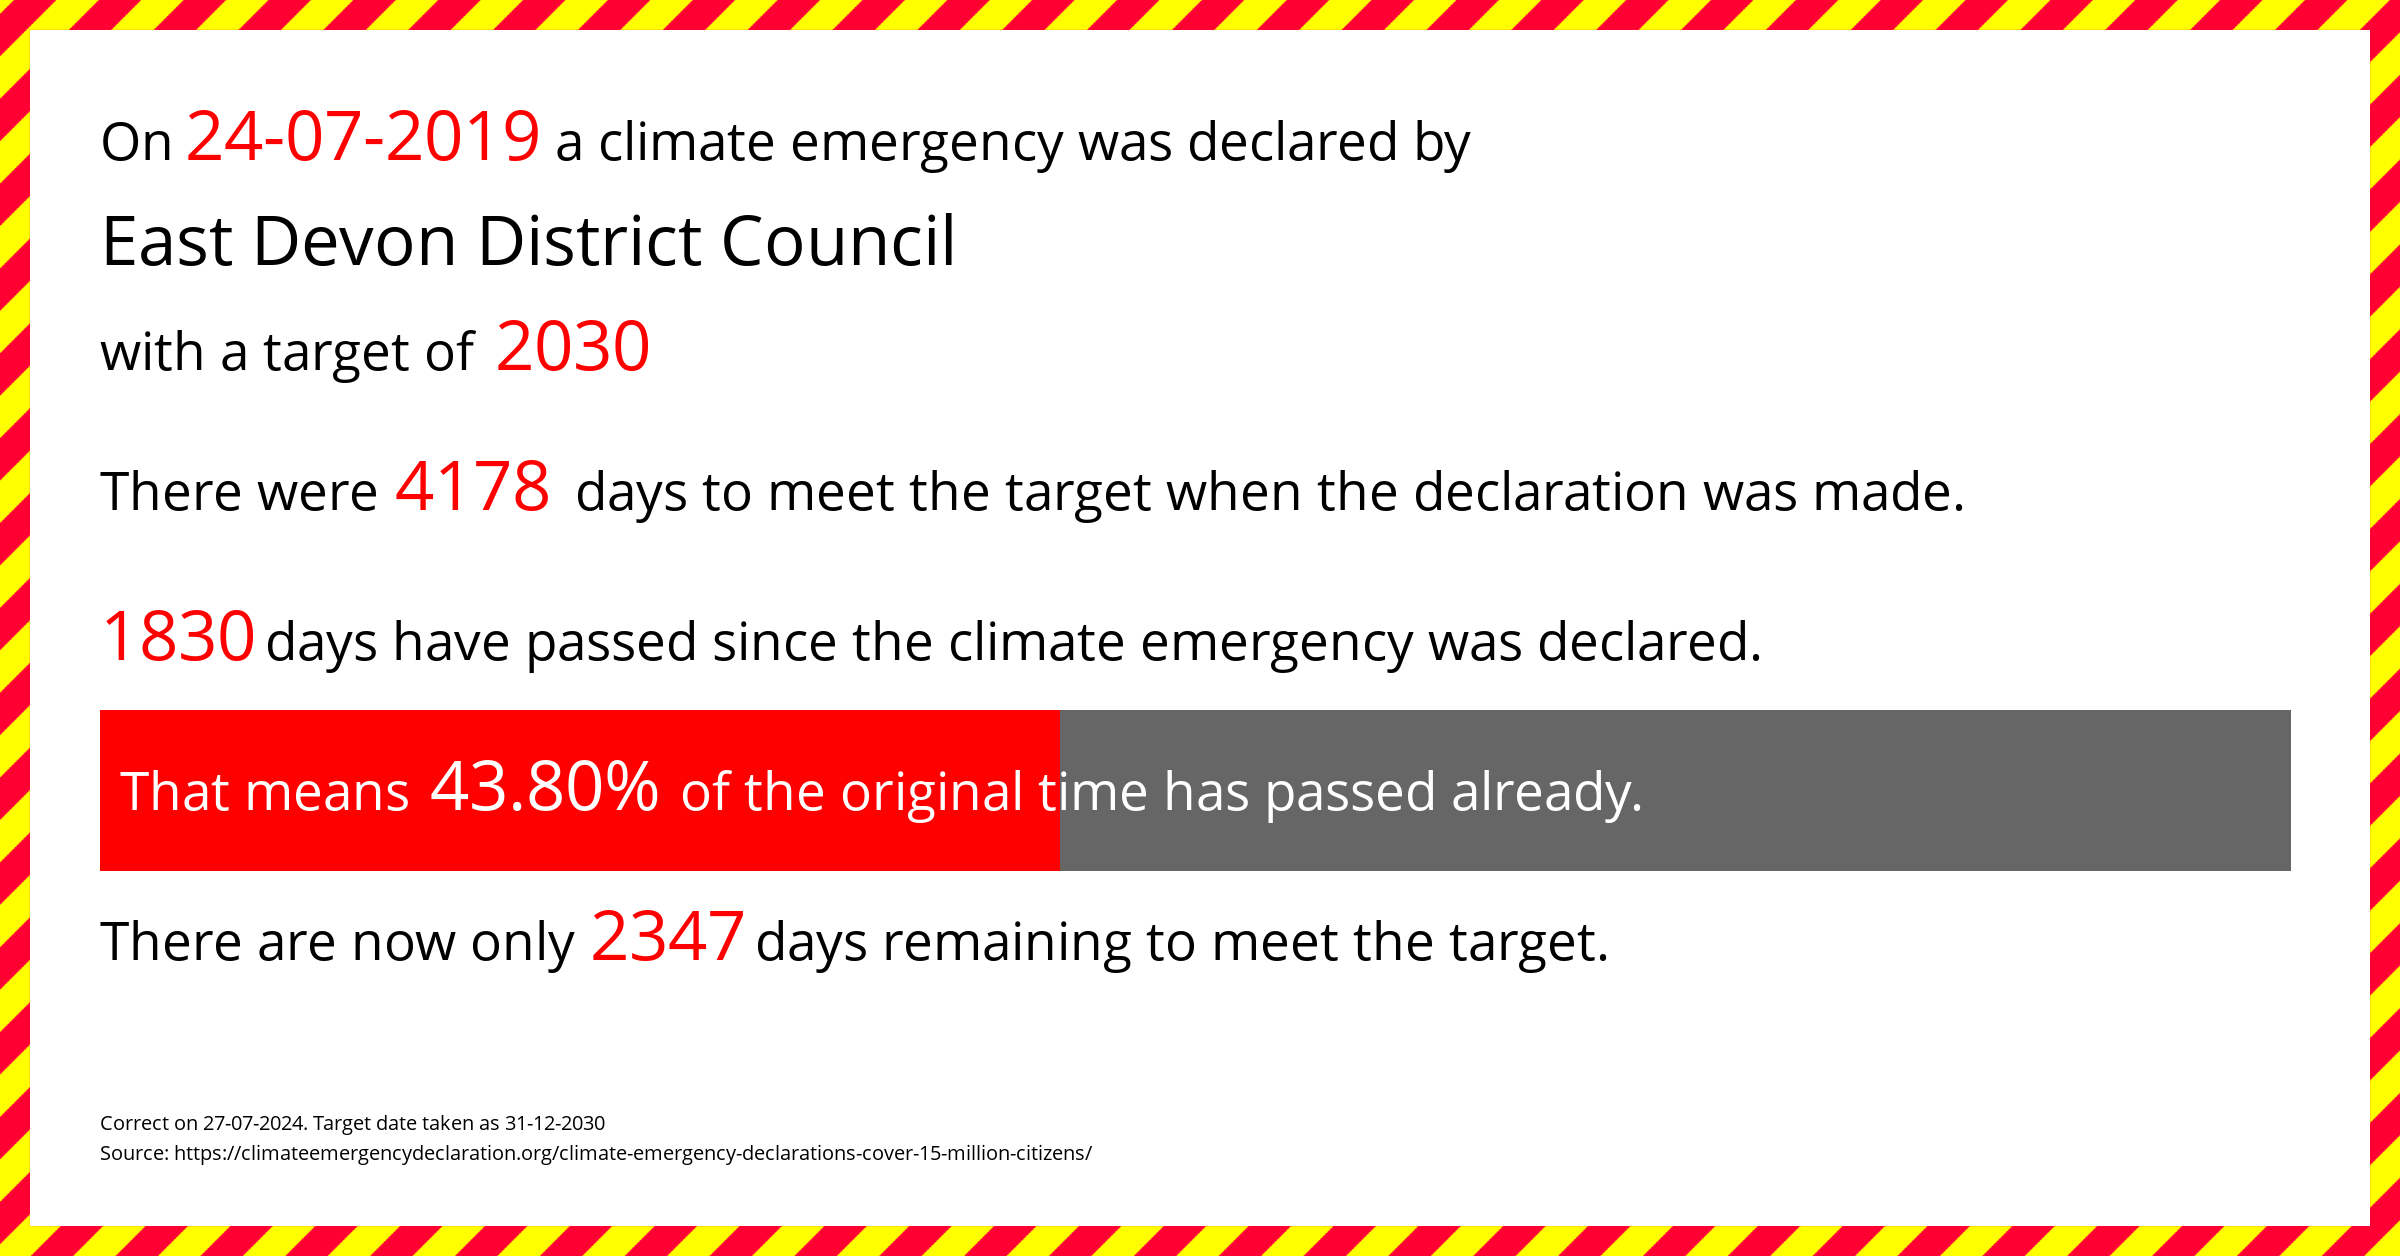 East Devon District Council declared a Climate emergency on Wednesday 24th July 2019, with a target of 2030.